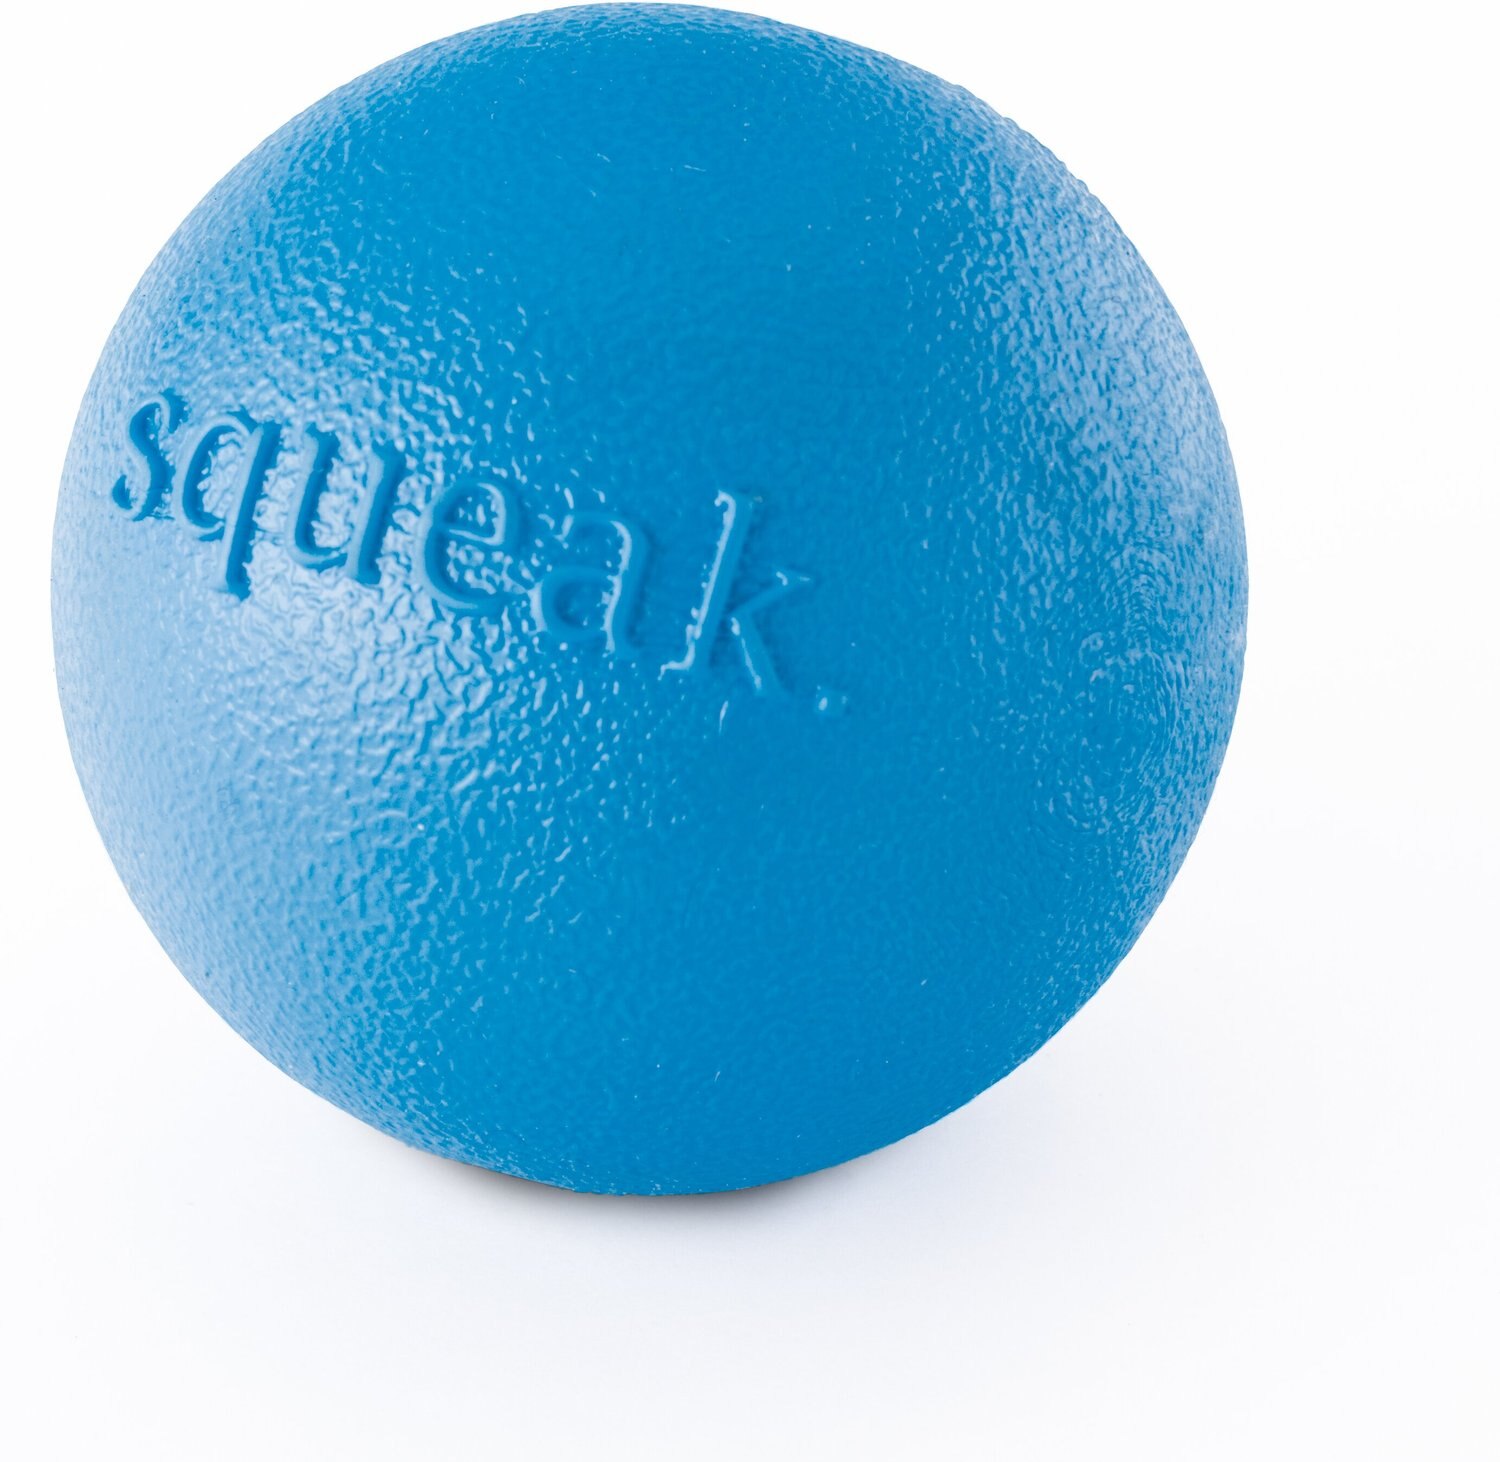 indestructible squeaky ball